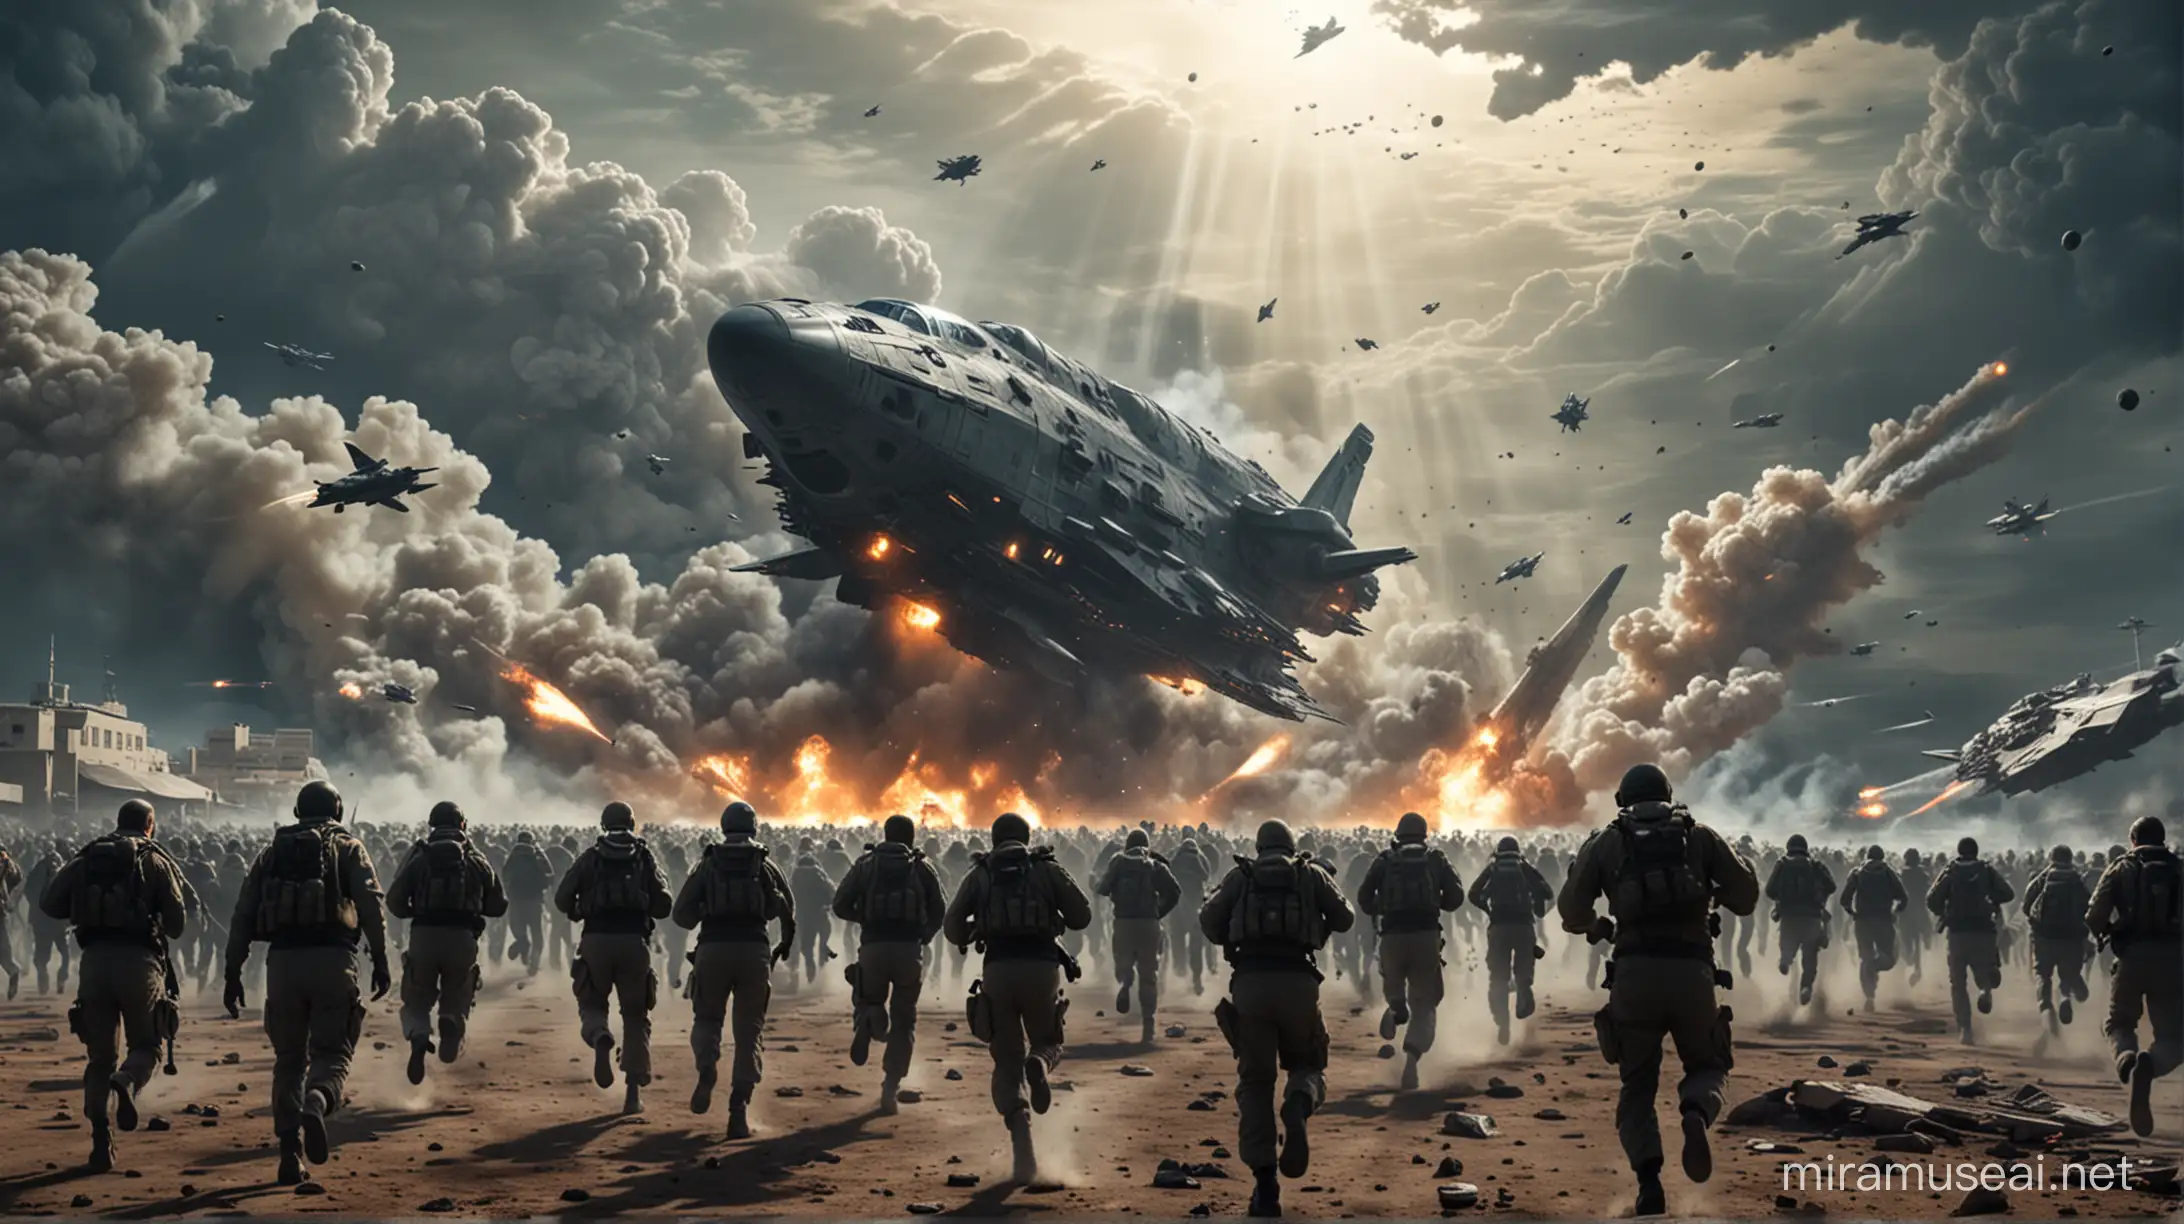 Escaping Earth Mass Exodus to Spaceship During World War 3